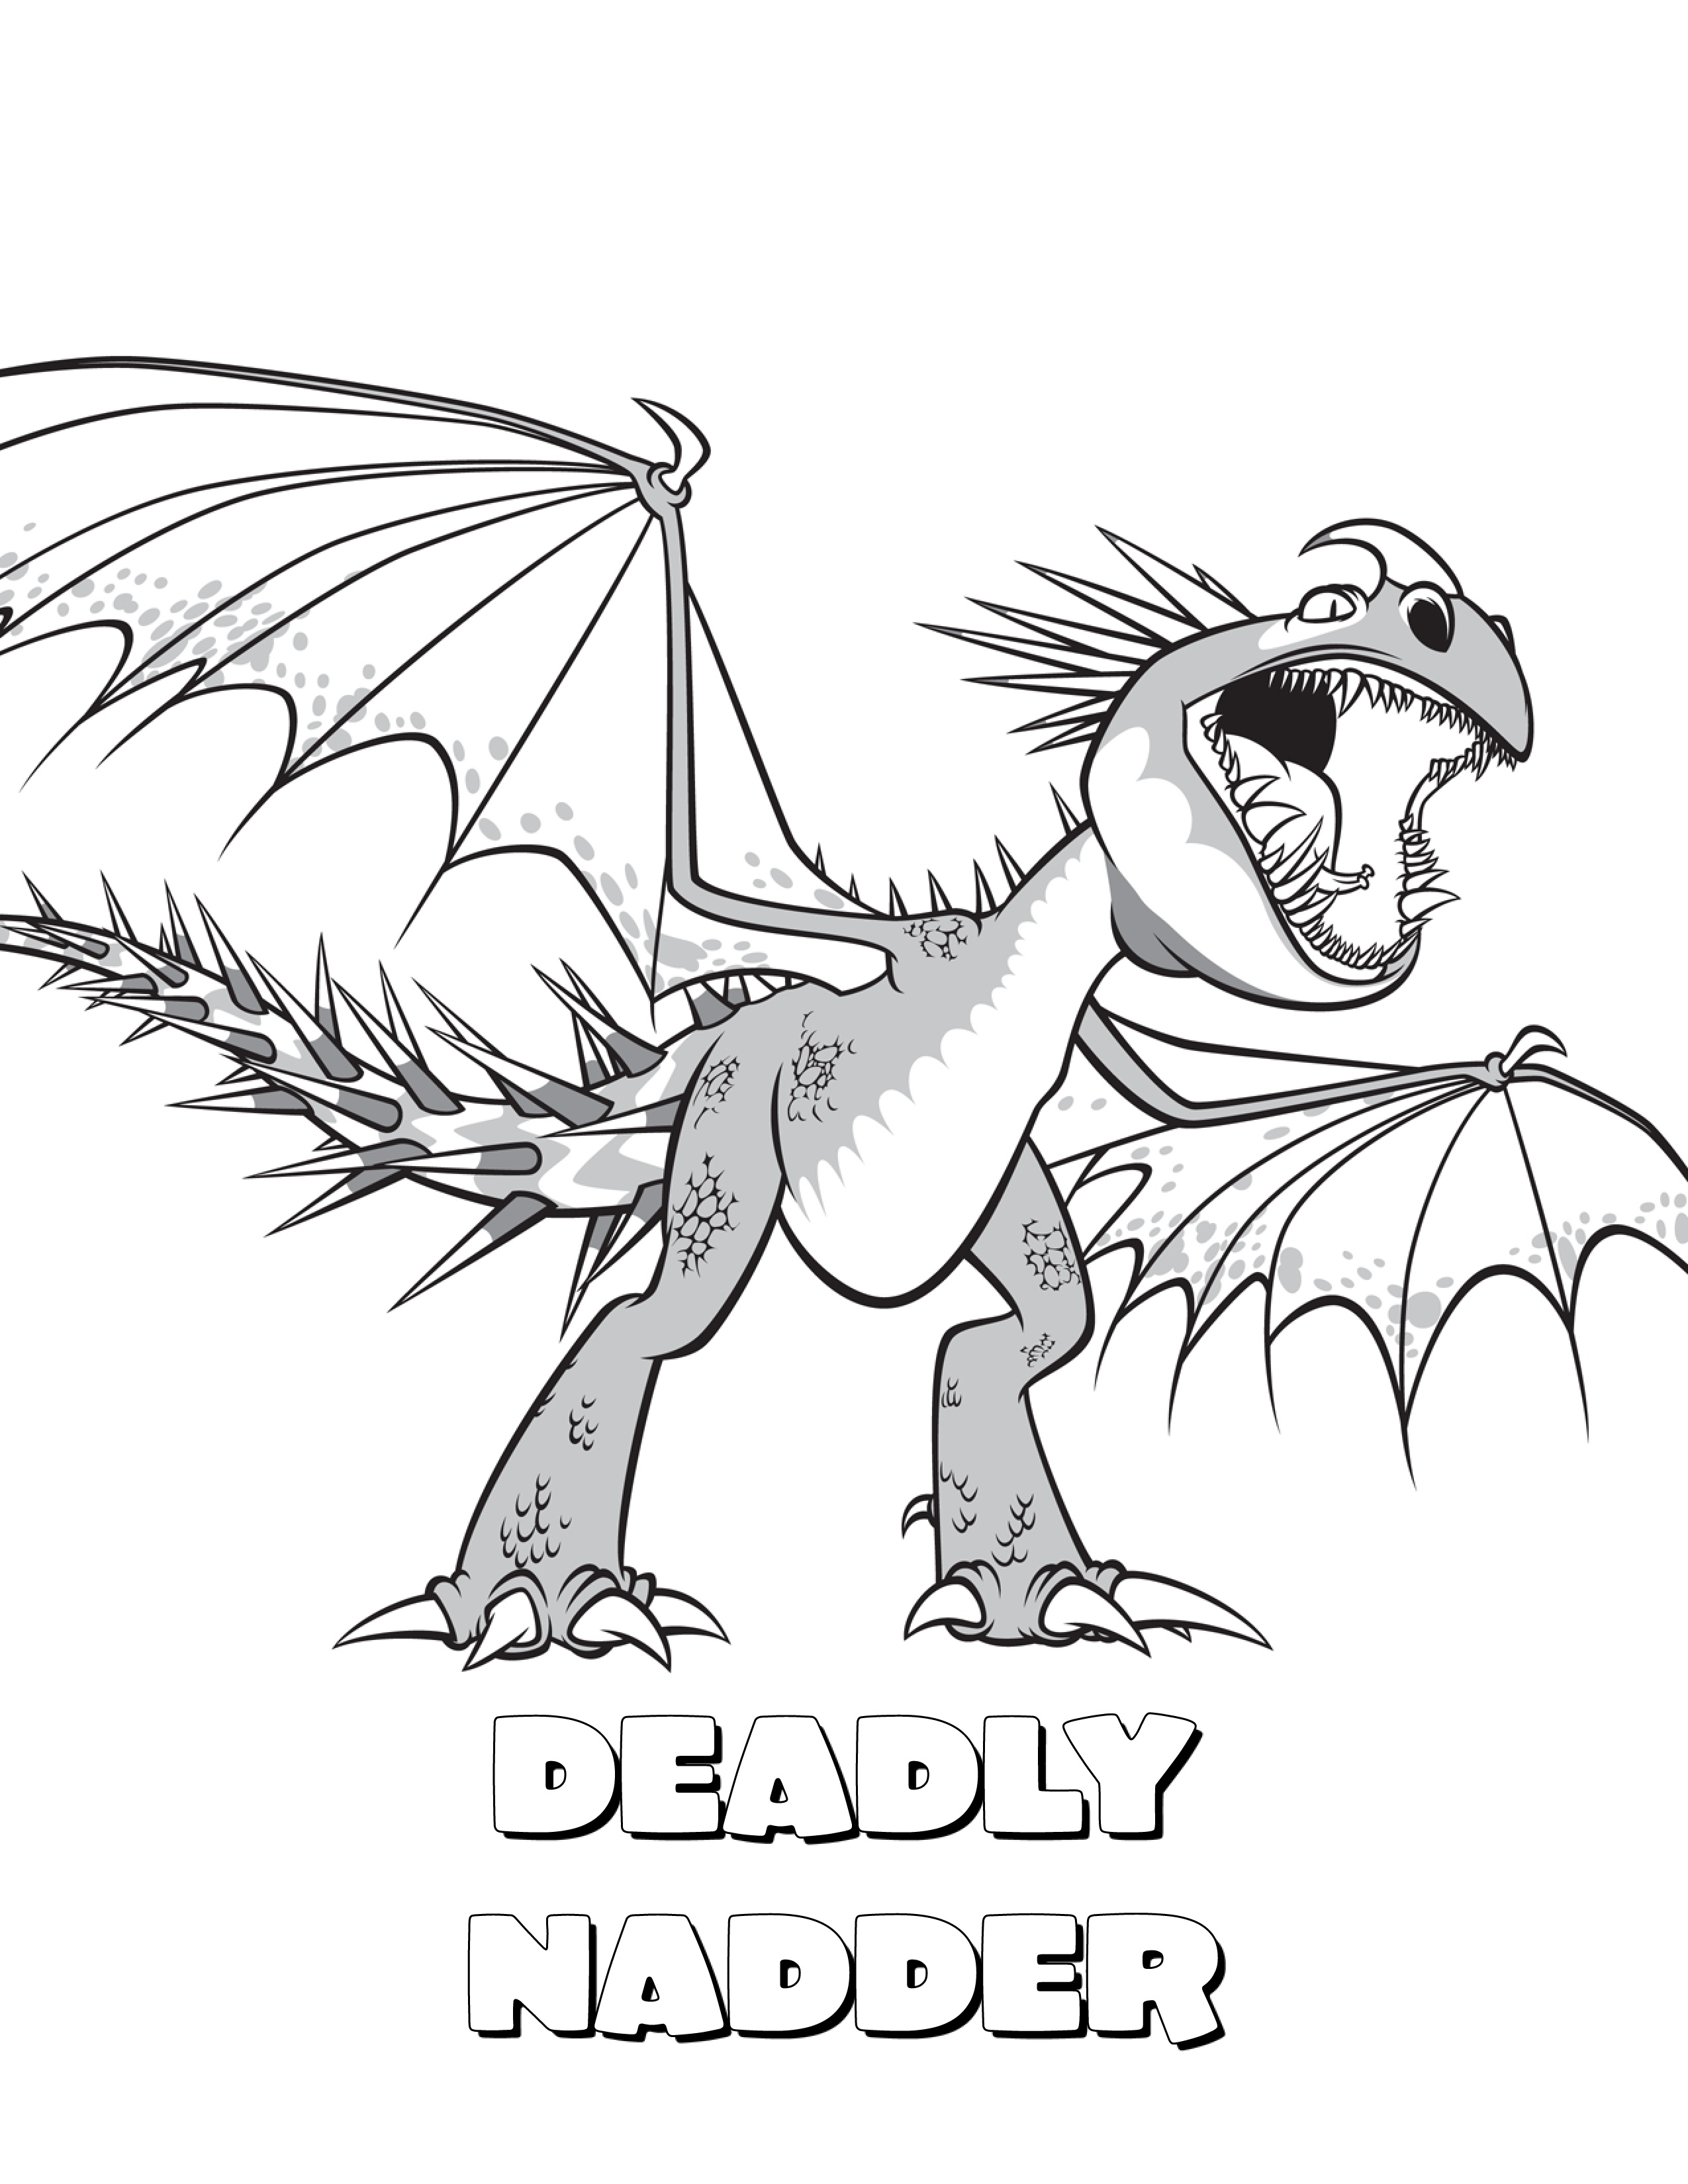 How to Train Your Dragon Coloring Pages - Best Coloring ...